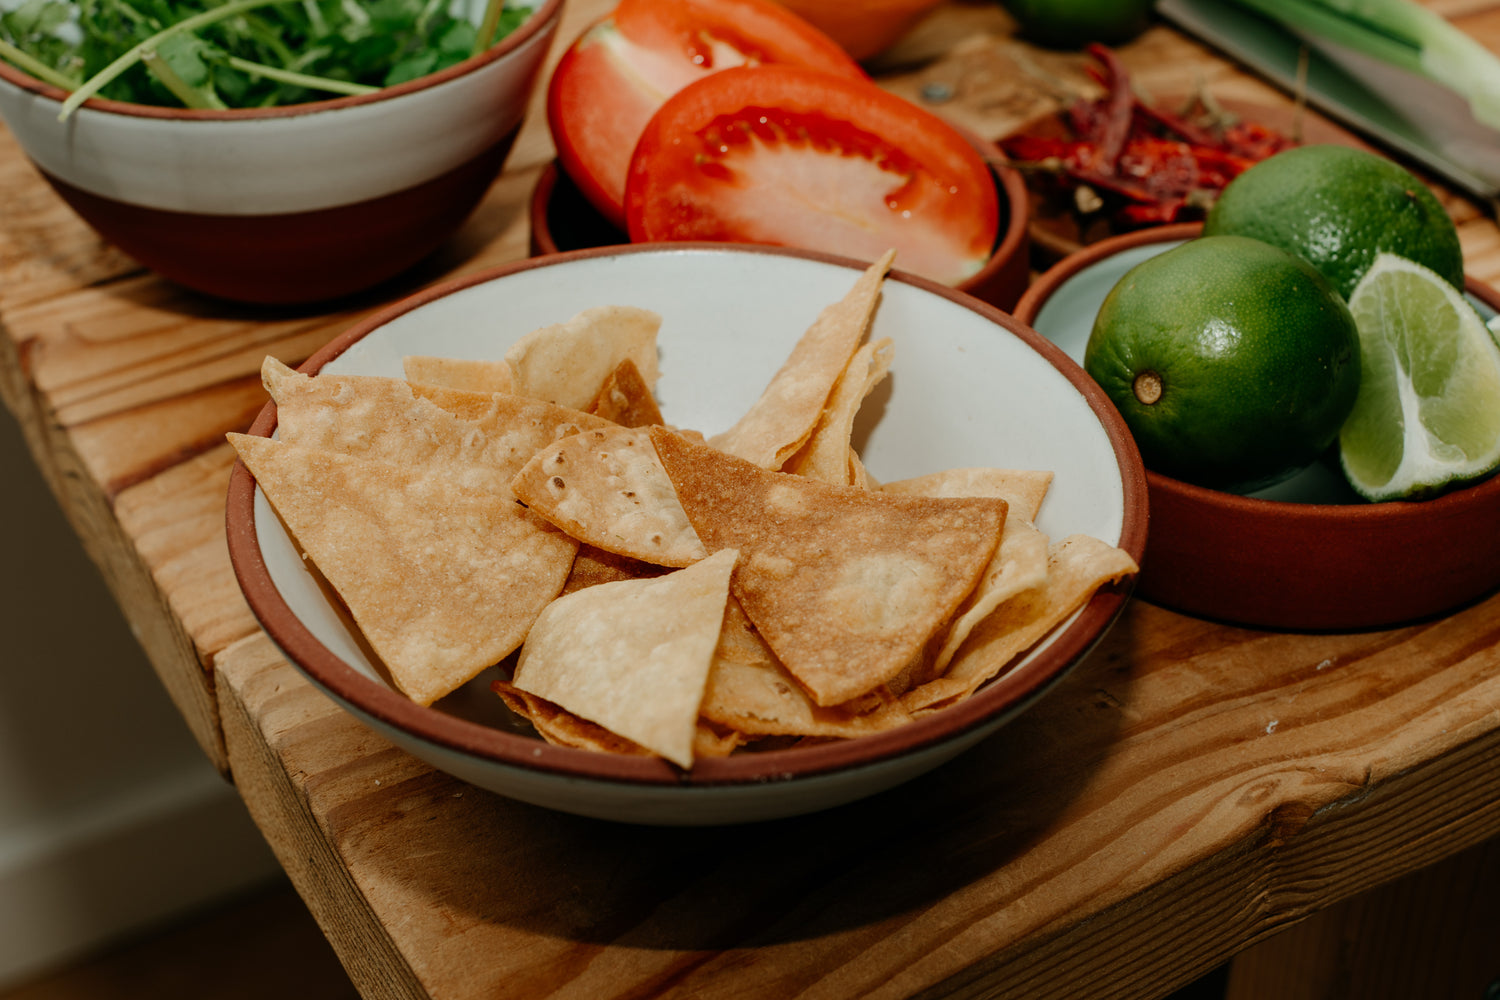 Chips and fresh produce to make handcrafted salsa